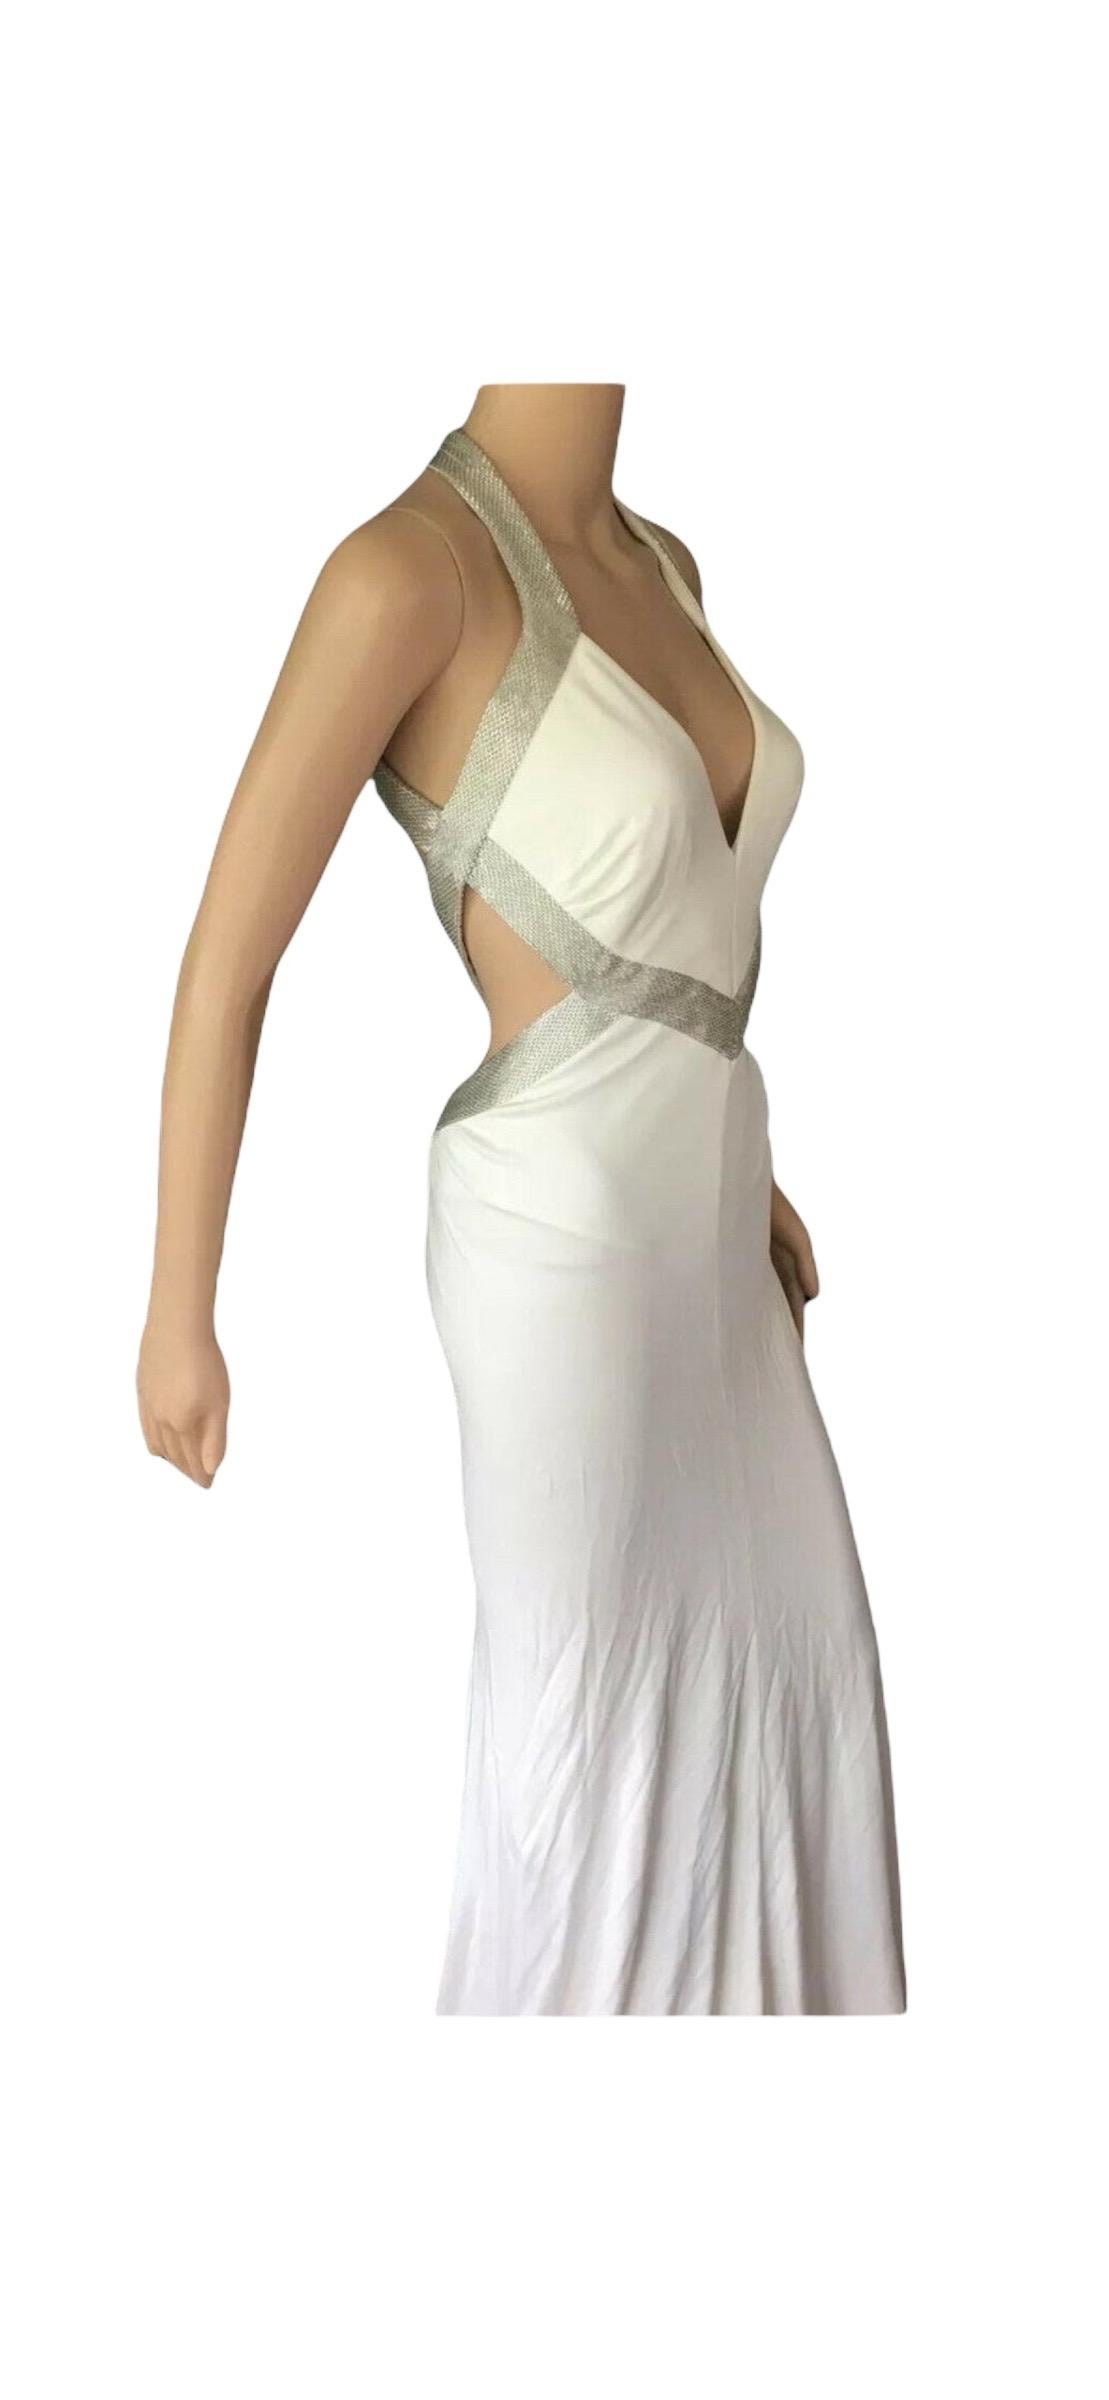 Roberto Cavalli Embellished Cutout Plunged Décolleté Open Back White Evening Dress Gown IT 40
